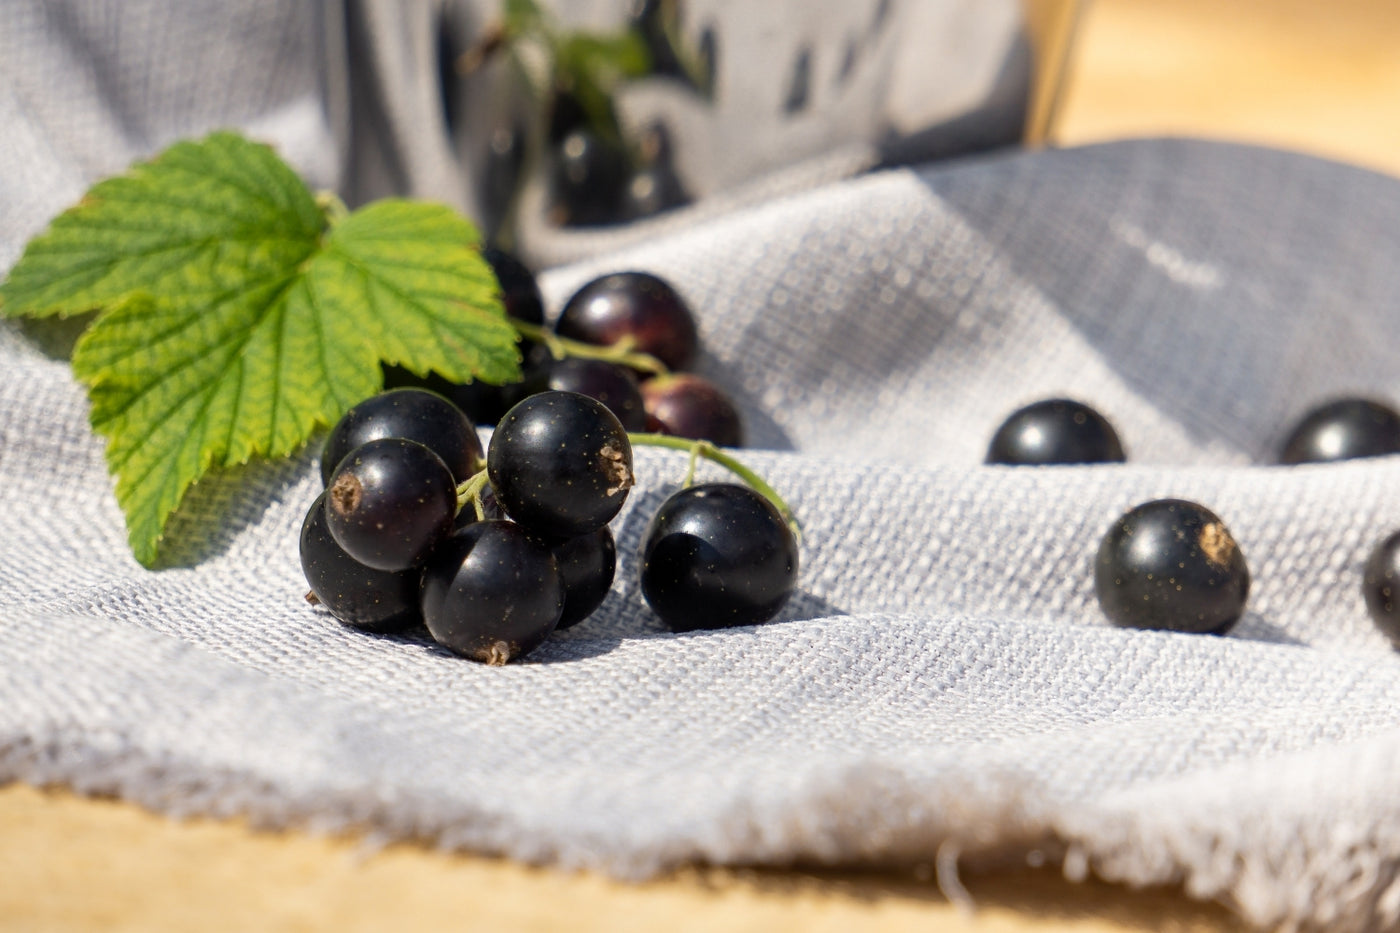 Looking to get in shape? Blackcurrants can help!